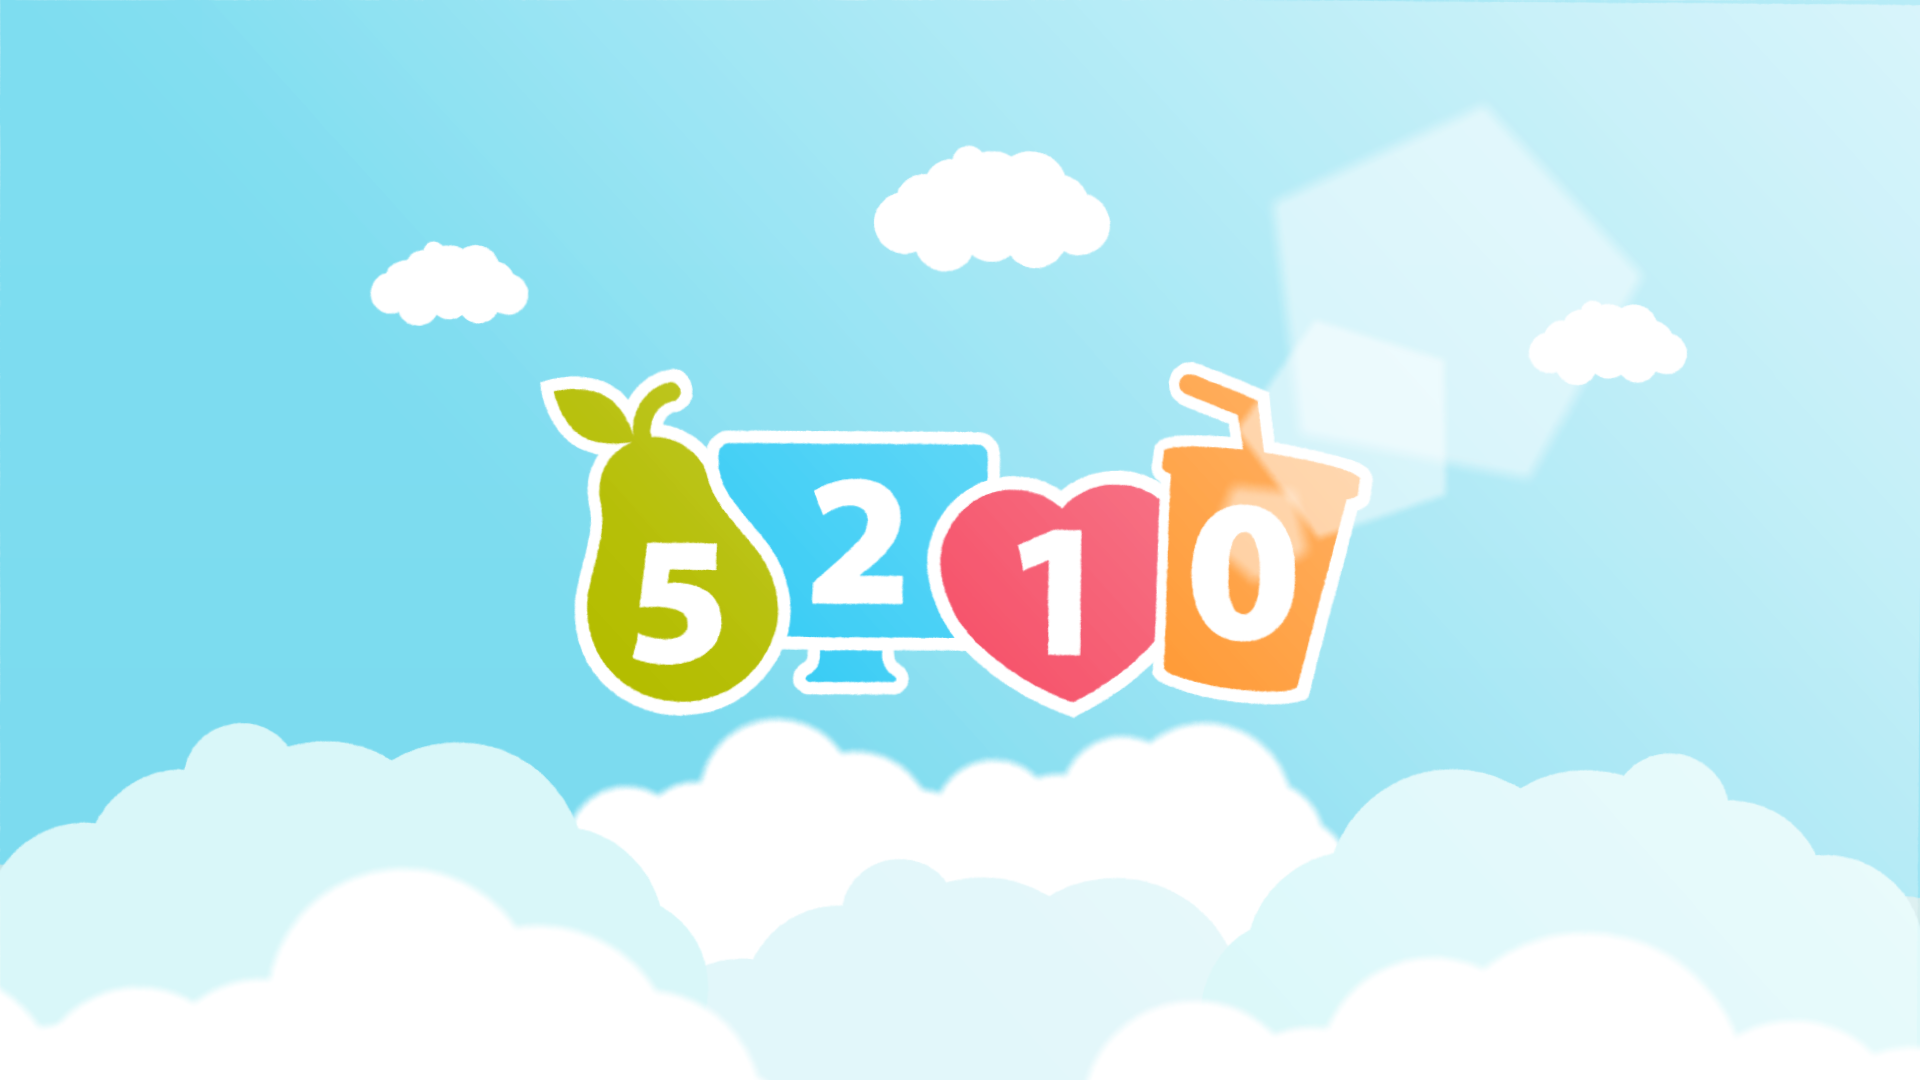 Animated Live5210 logo with clouds